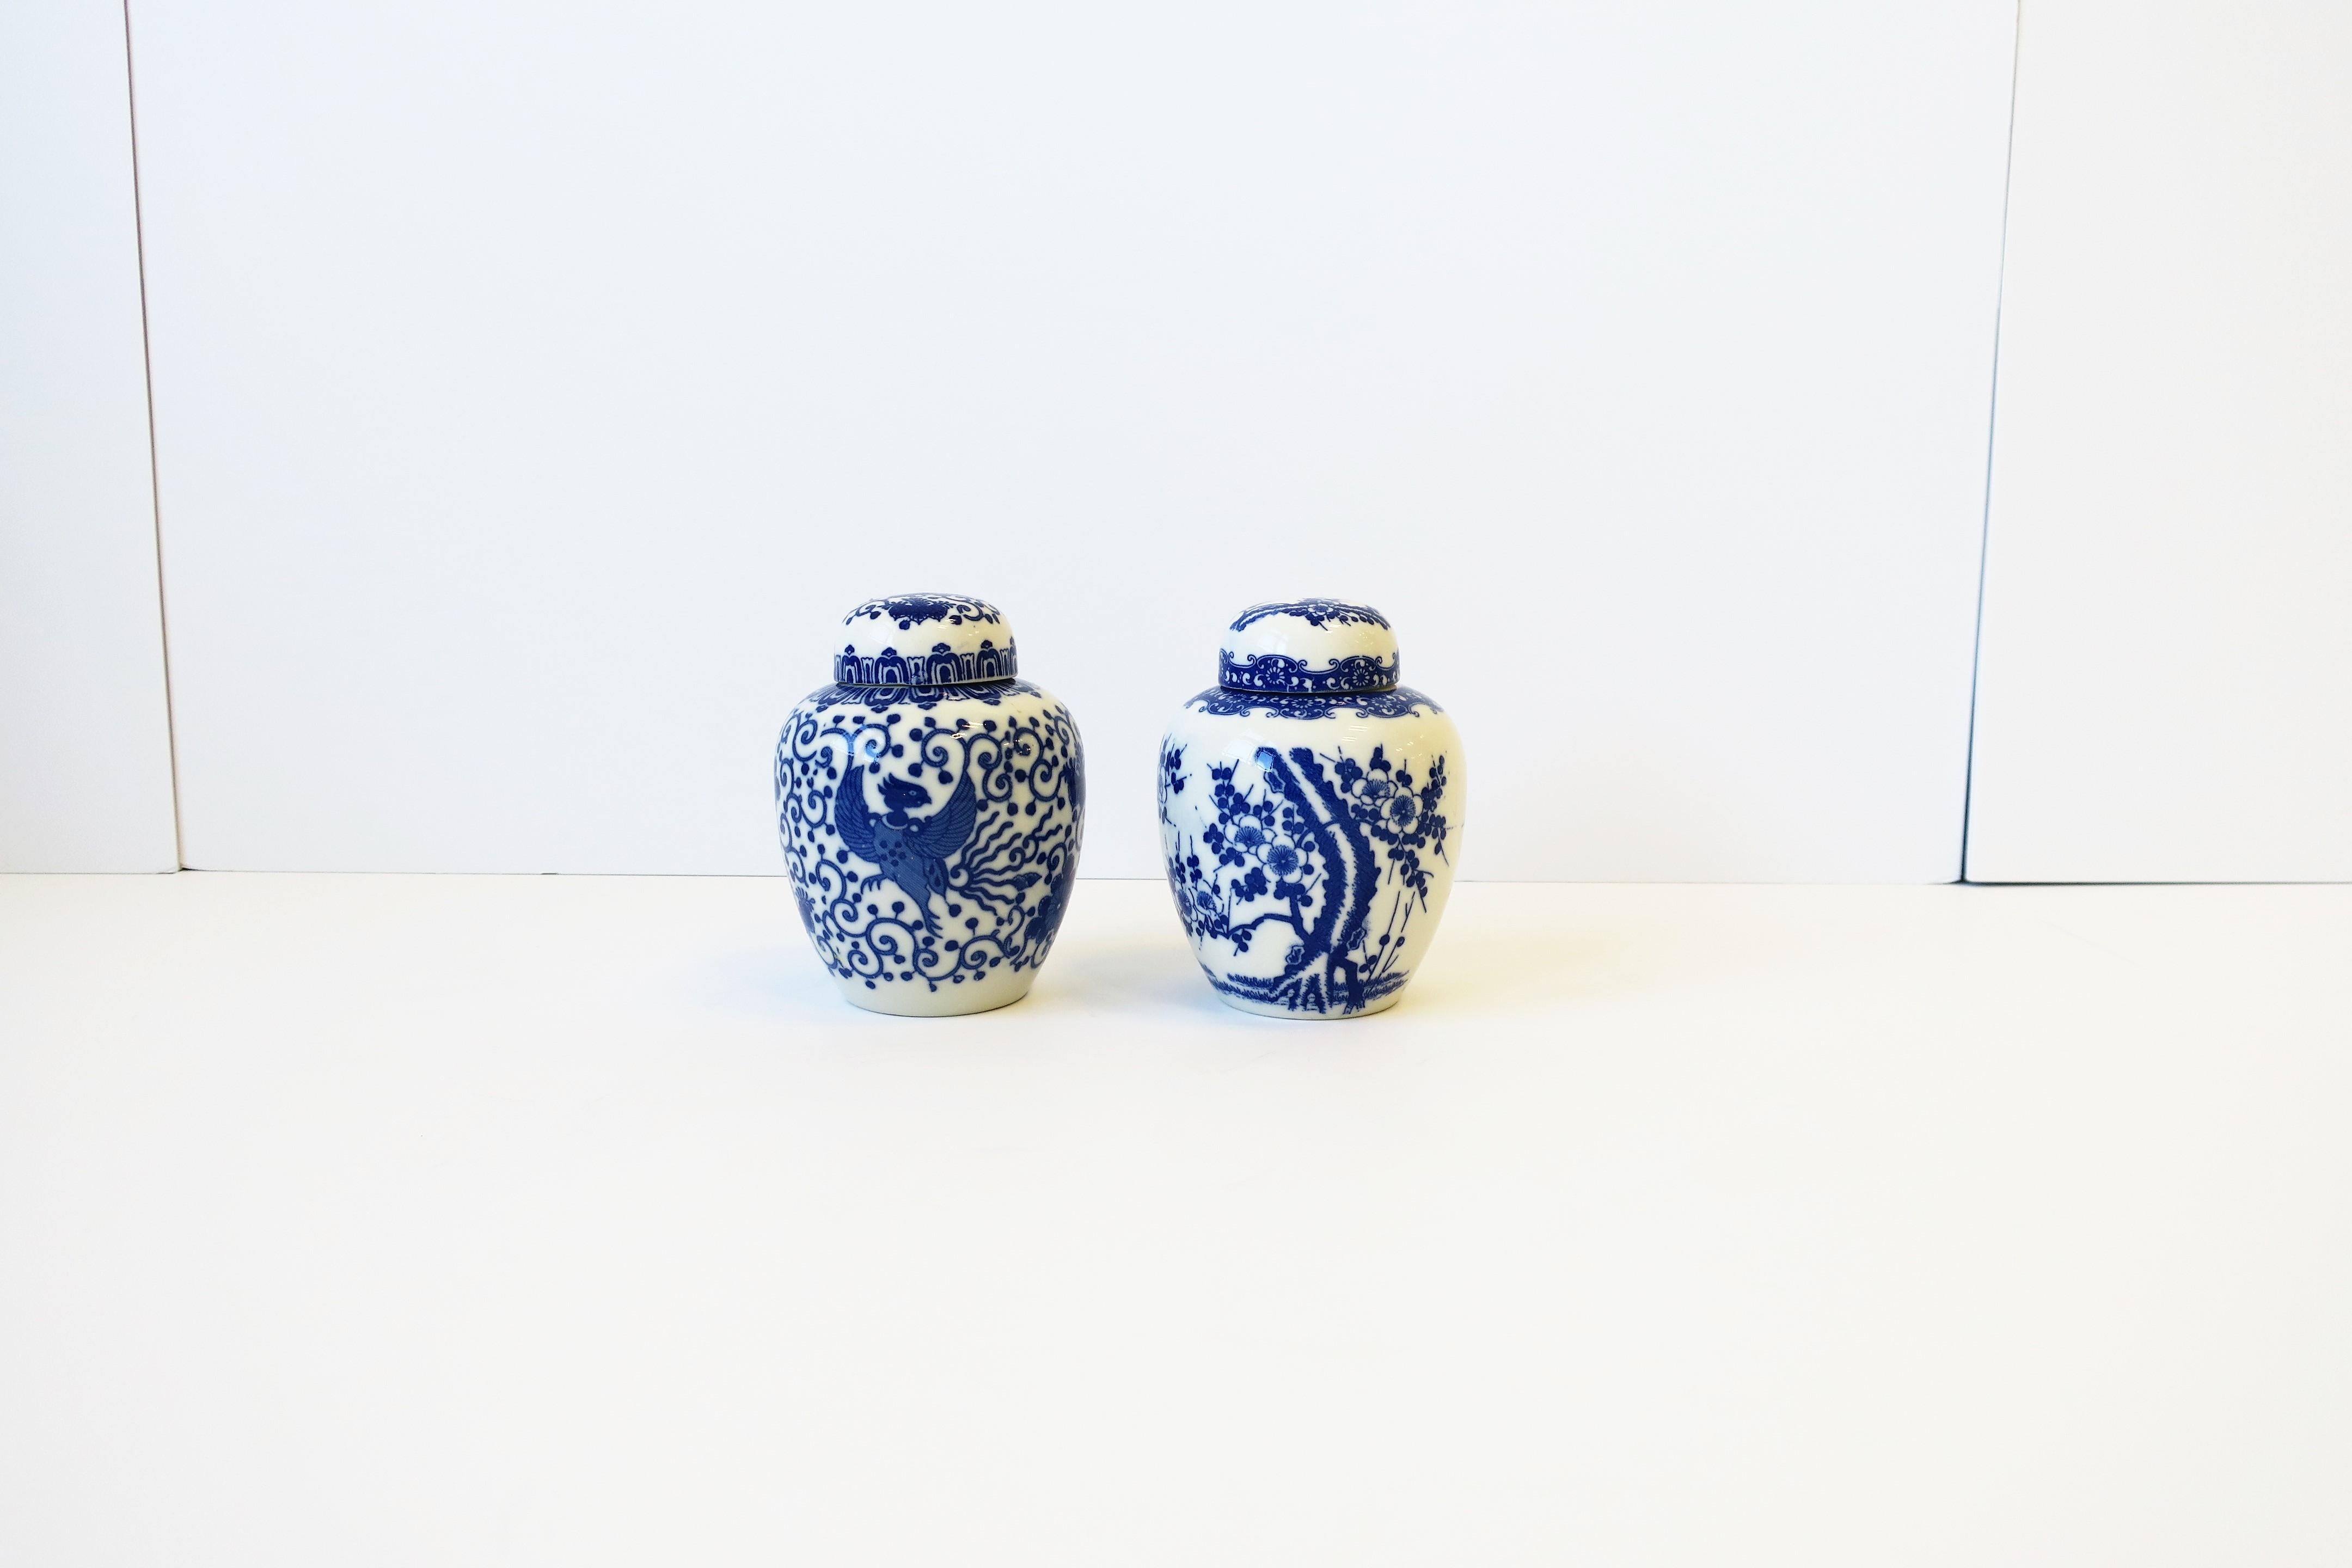 A pair/set of blue and white porcelain Japanese ginger jars with phoenix bird and cherry blossom flower design, circa mid-20th century, 1960s, Japan. Marked on bottom as show in image #19. Dimensions: 3.88